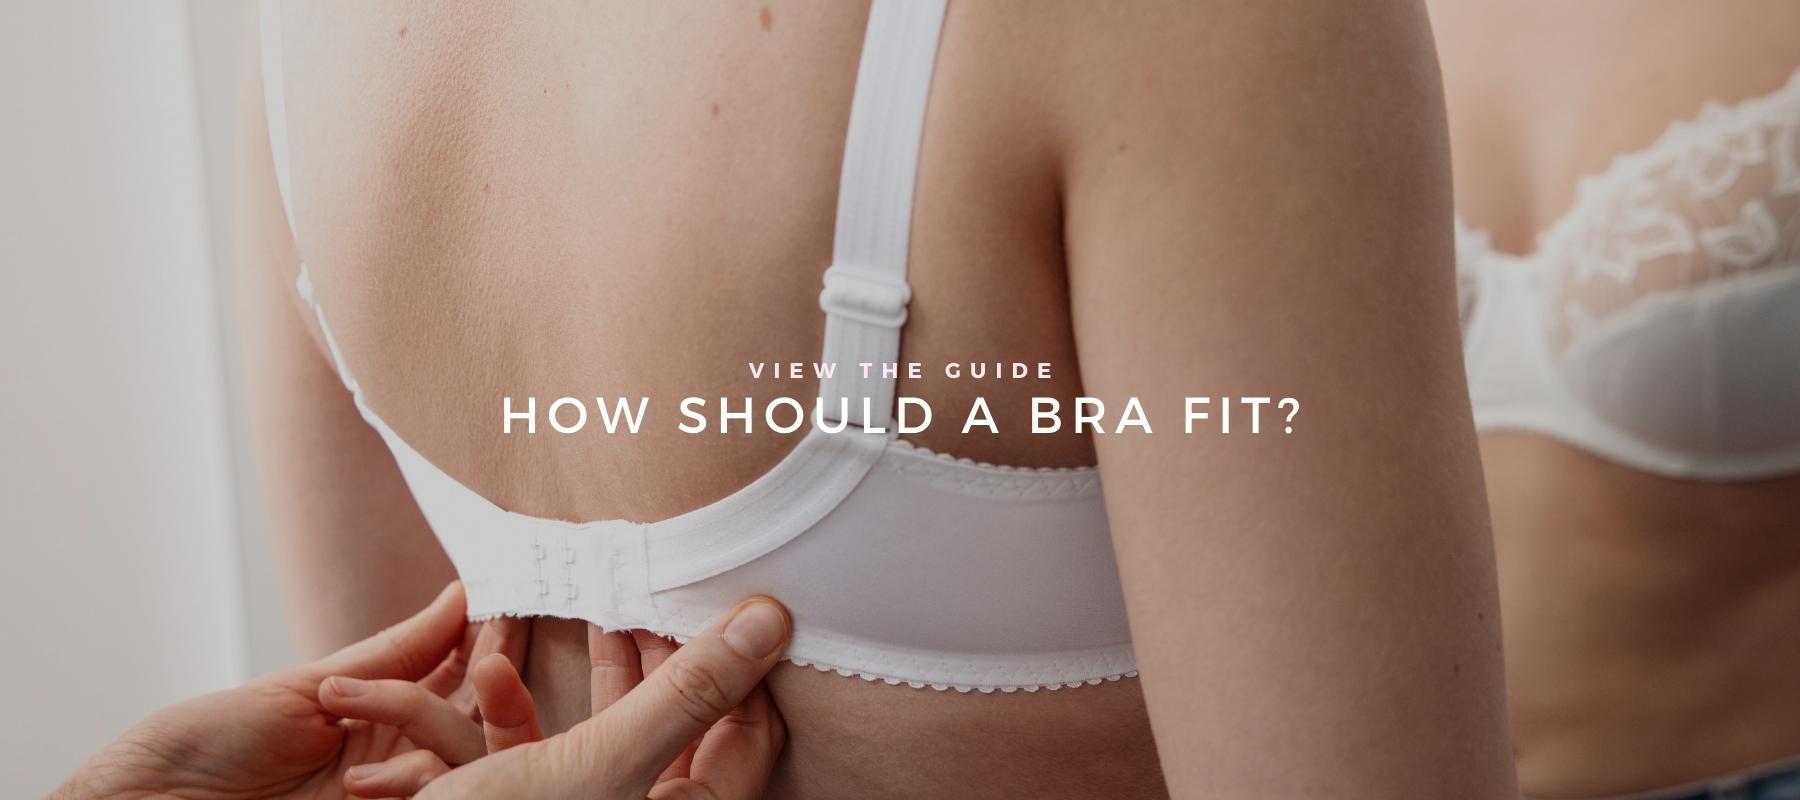 Why My Bra Band is Too Tight?